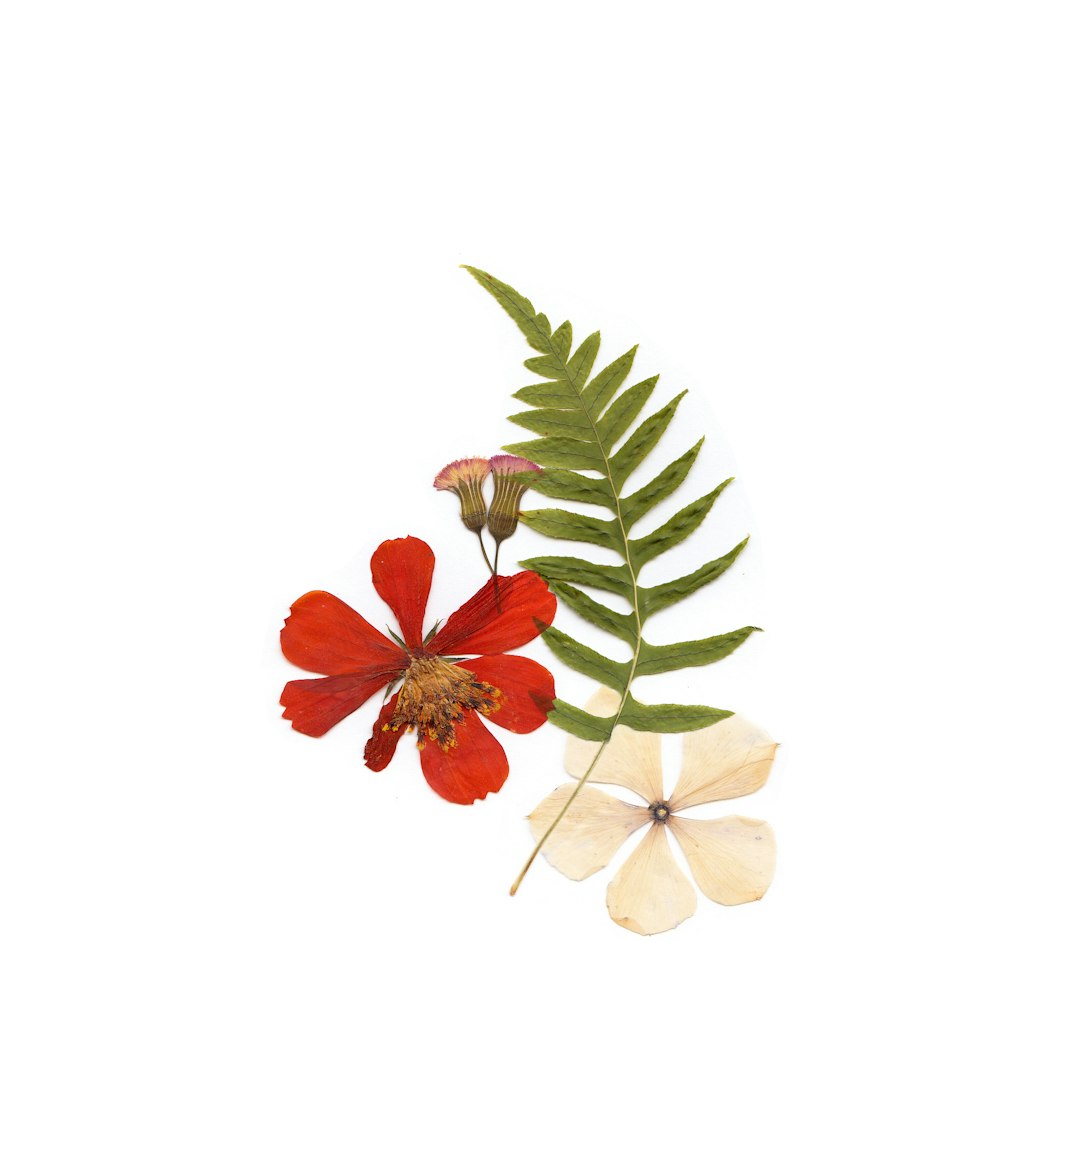 holy berry, plant, green fern, white flower, and red flower on white surface